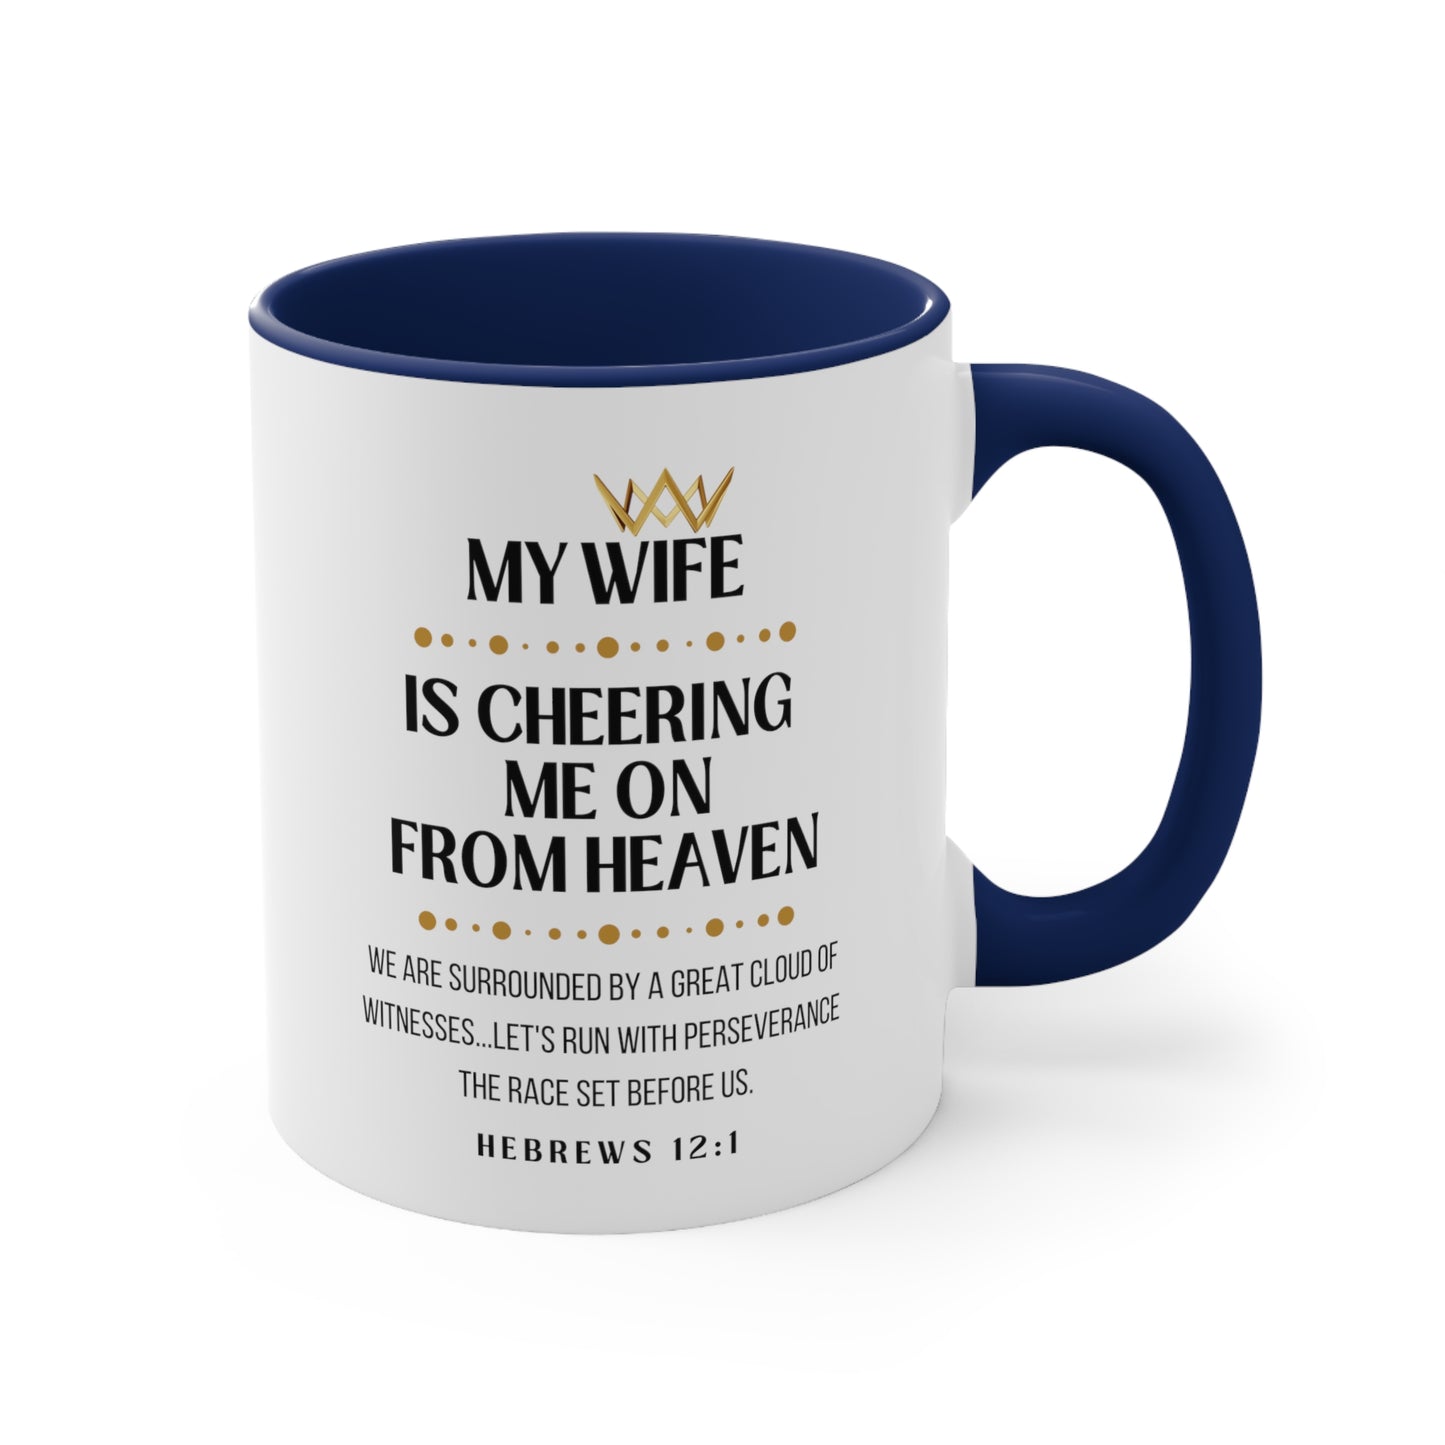 Wife Memorial Gift Mug, Cheering Me on from Heaven